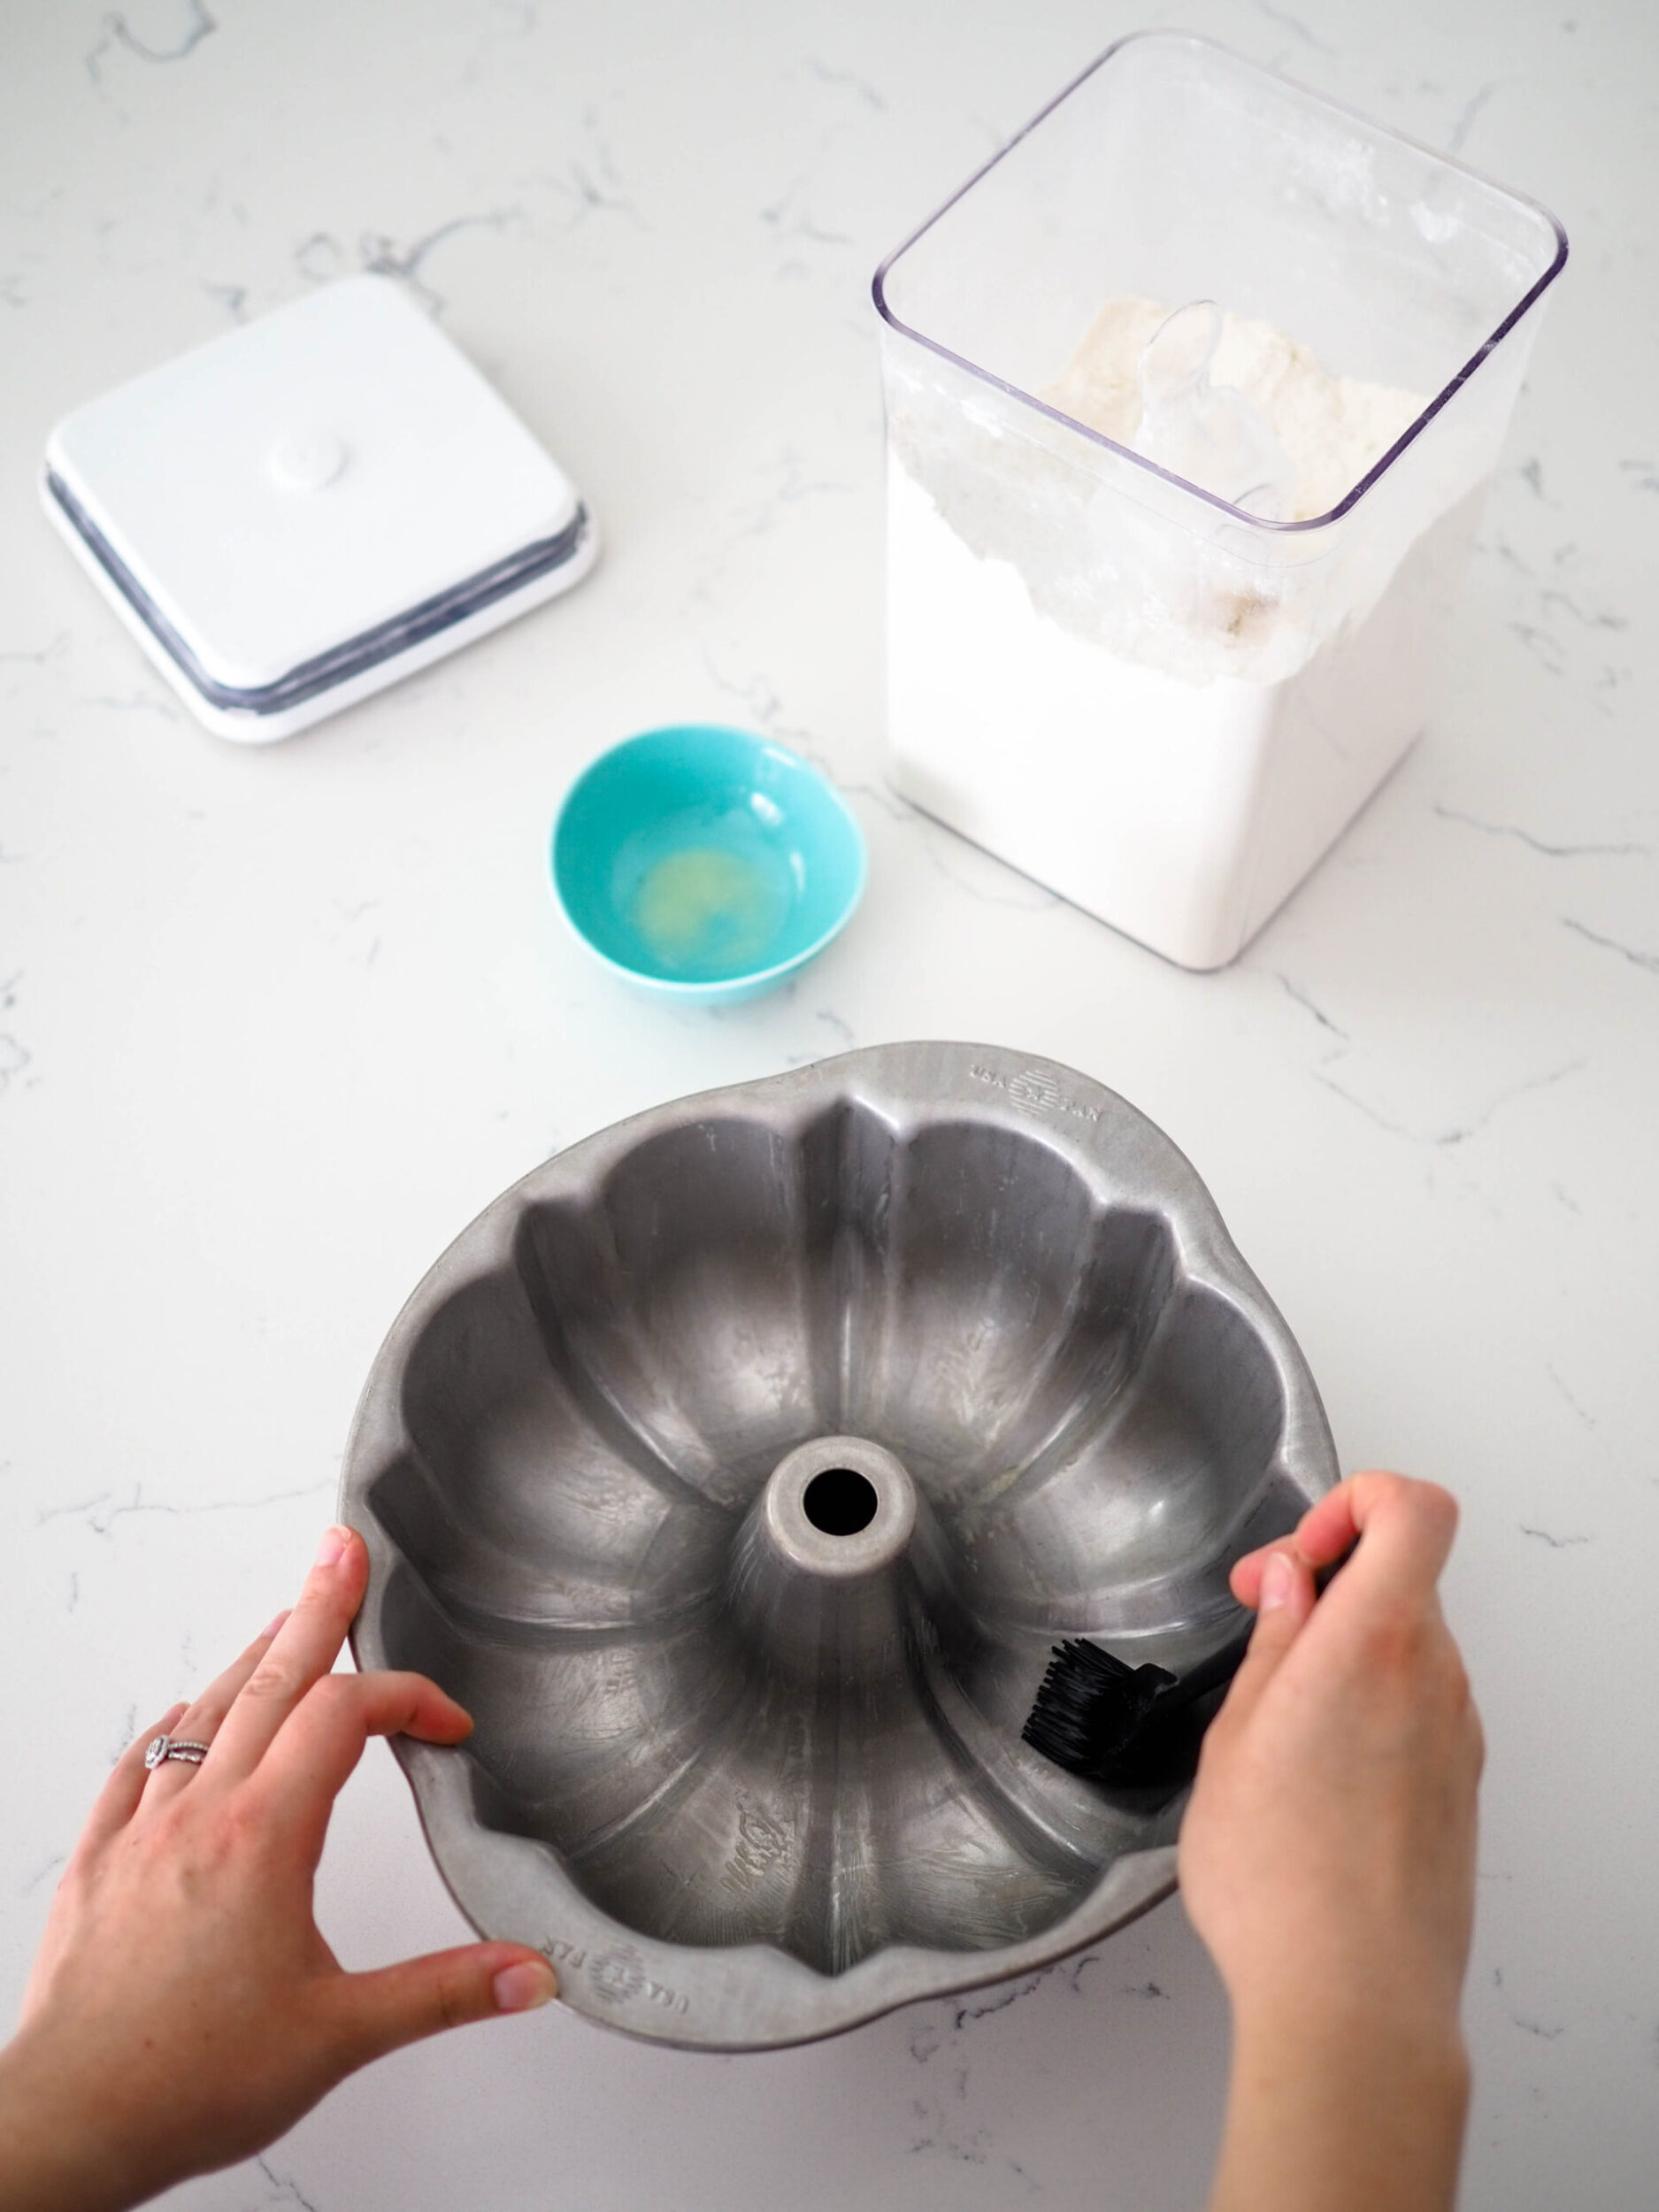 Two hands brush melted butter into a Bundt pan.